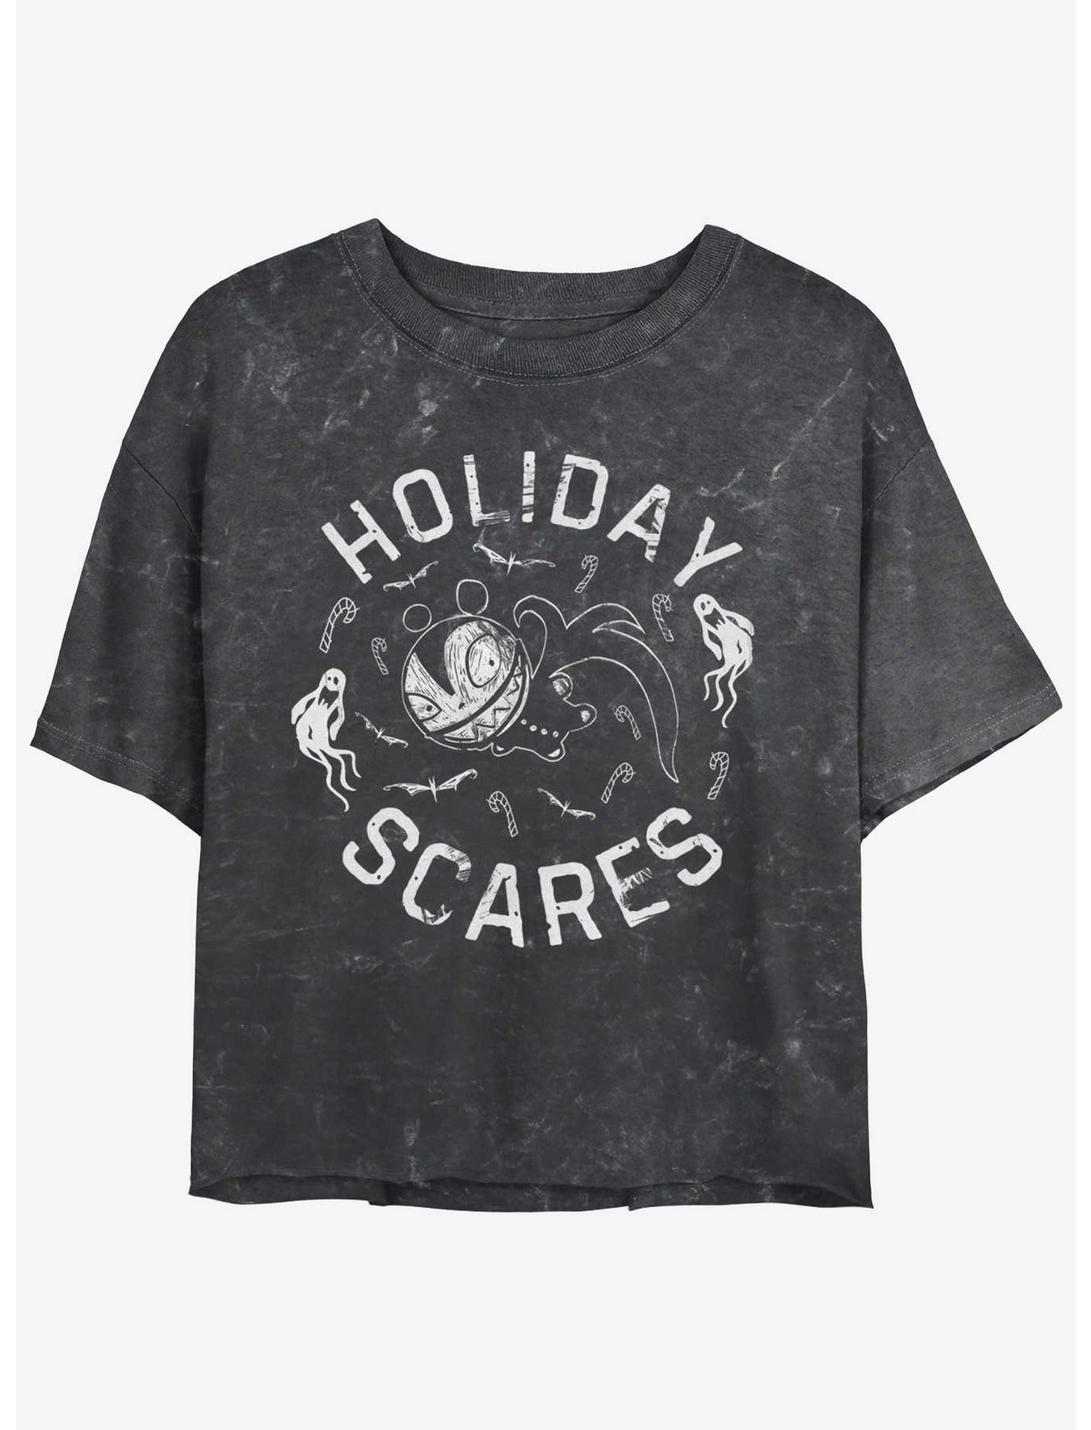 Disney The Nightmare Before Christmas Holiday Scares Vampire Teddy Mineral Wash Girls Crop T-Shirt, BLACK, hi-res